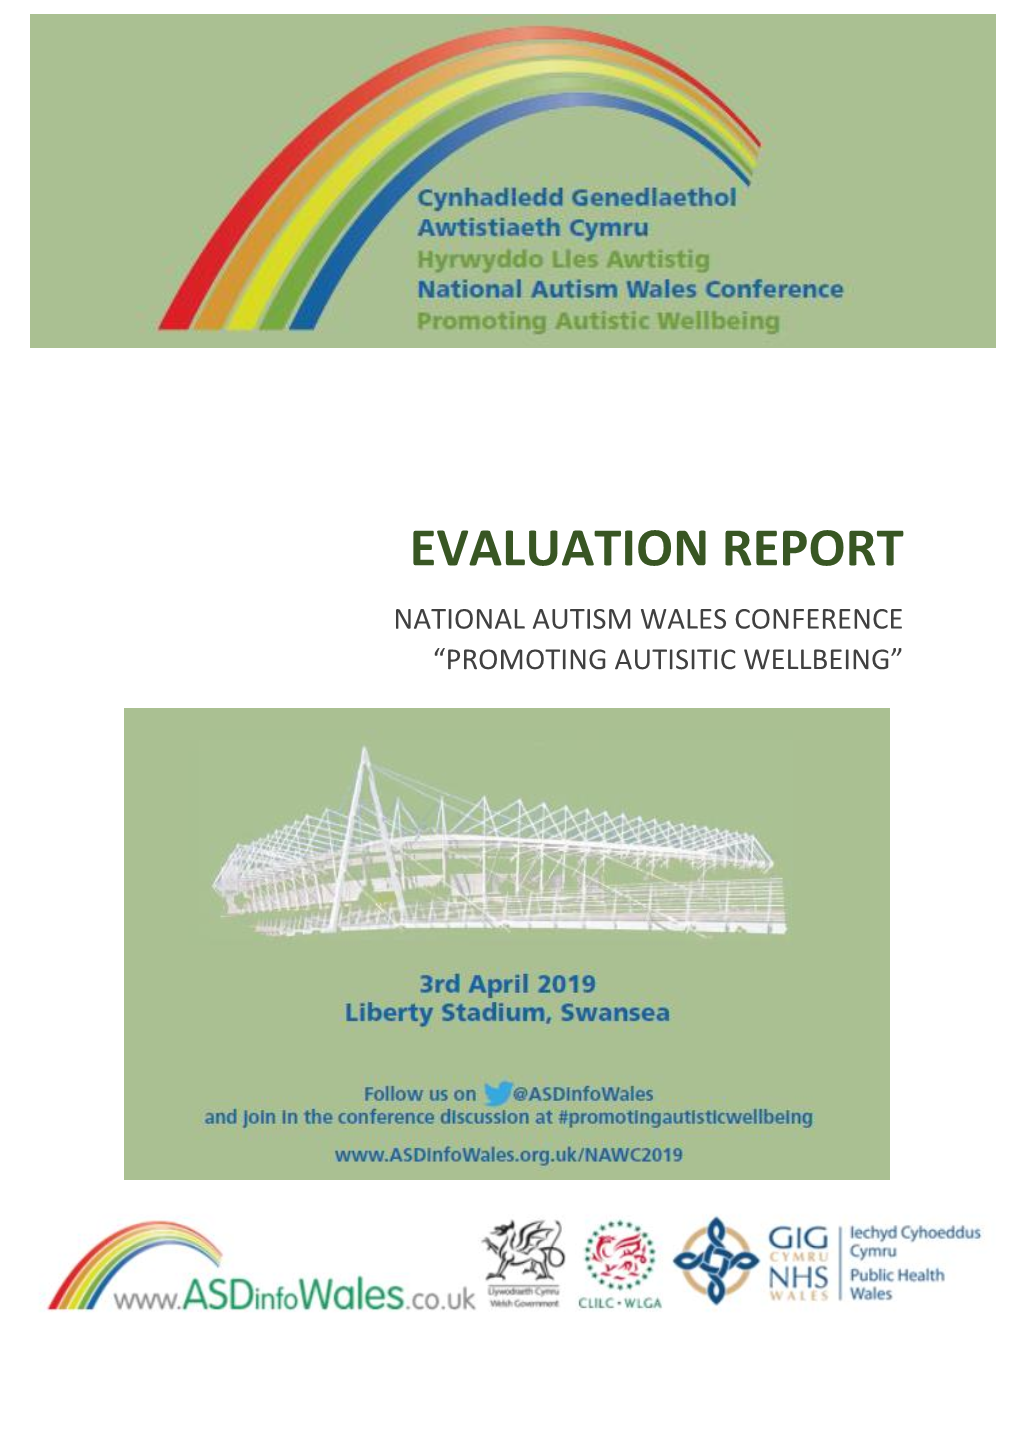 Evaluation Report National Autism Wales Conference “Promoting Autisitic Wellbeing”